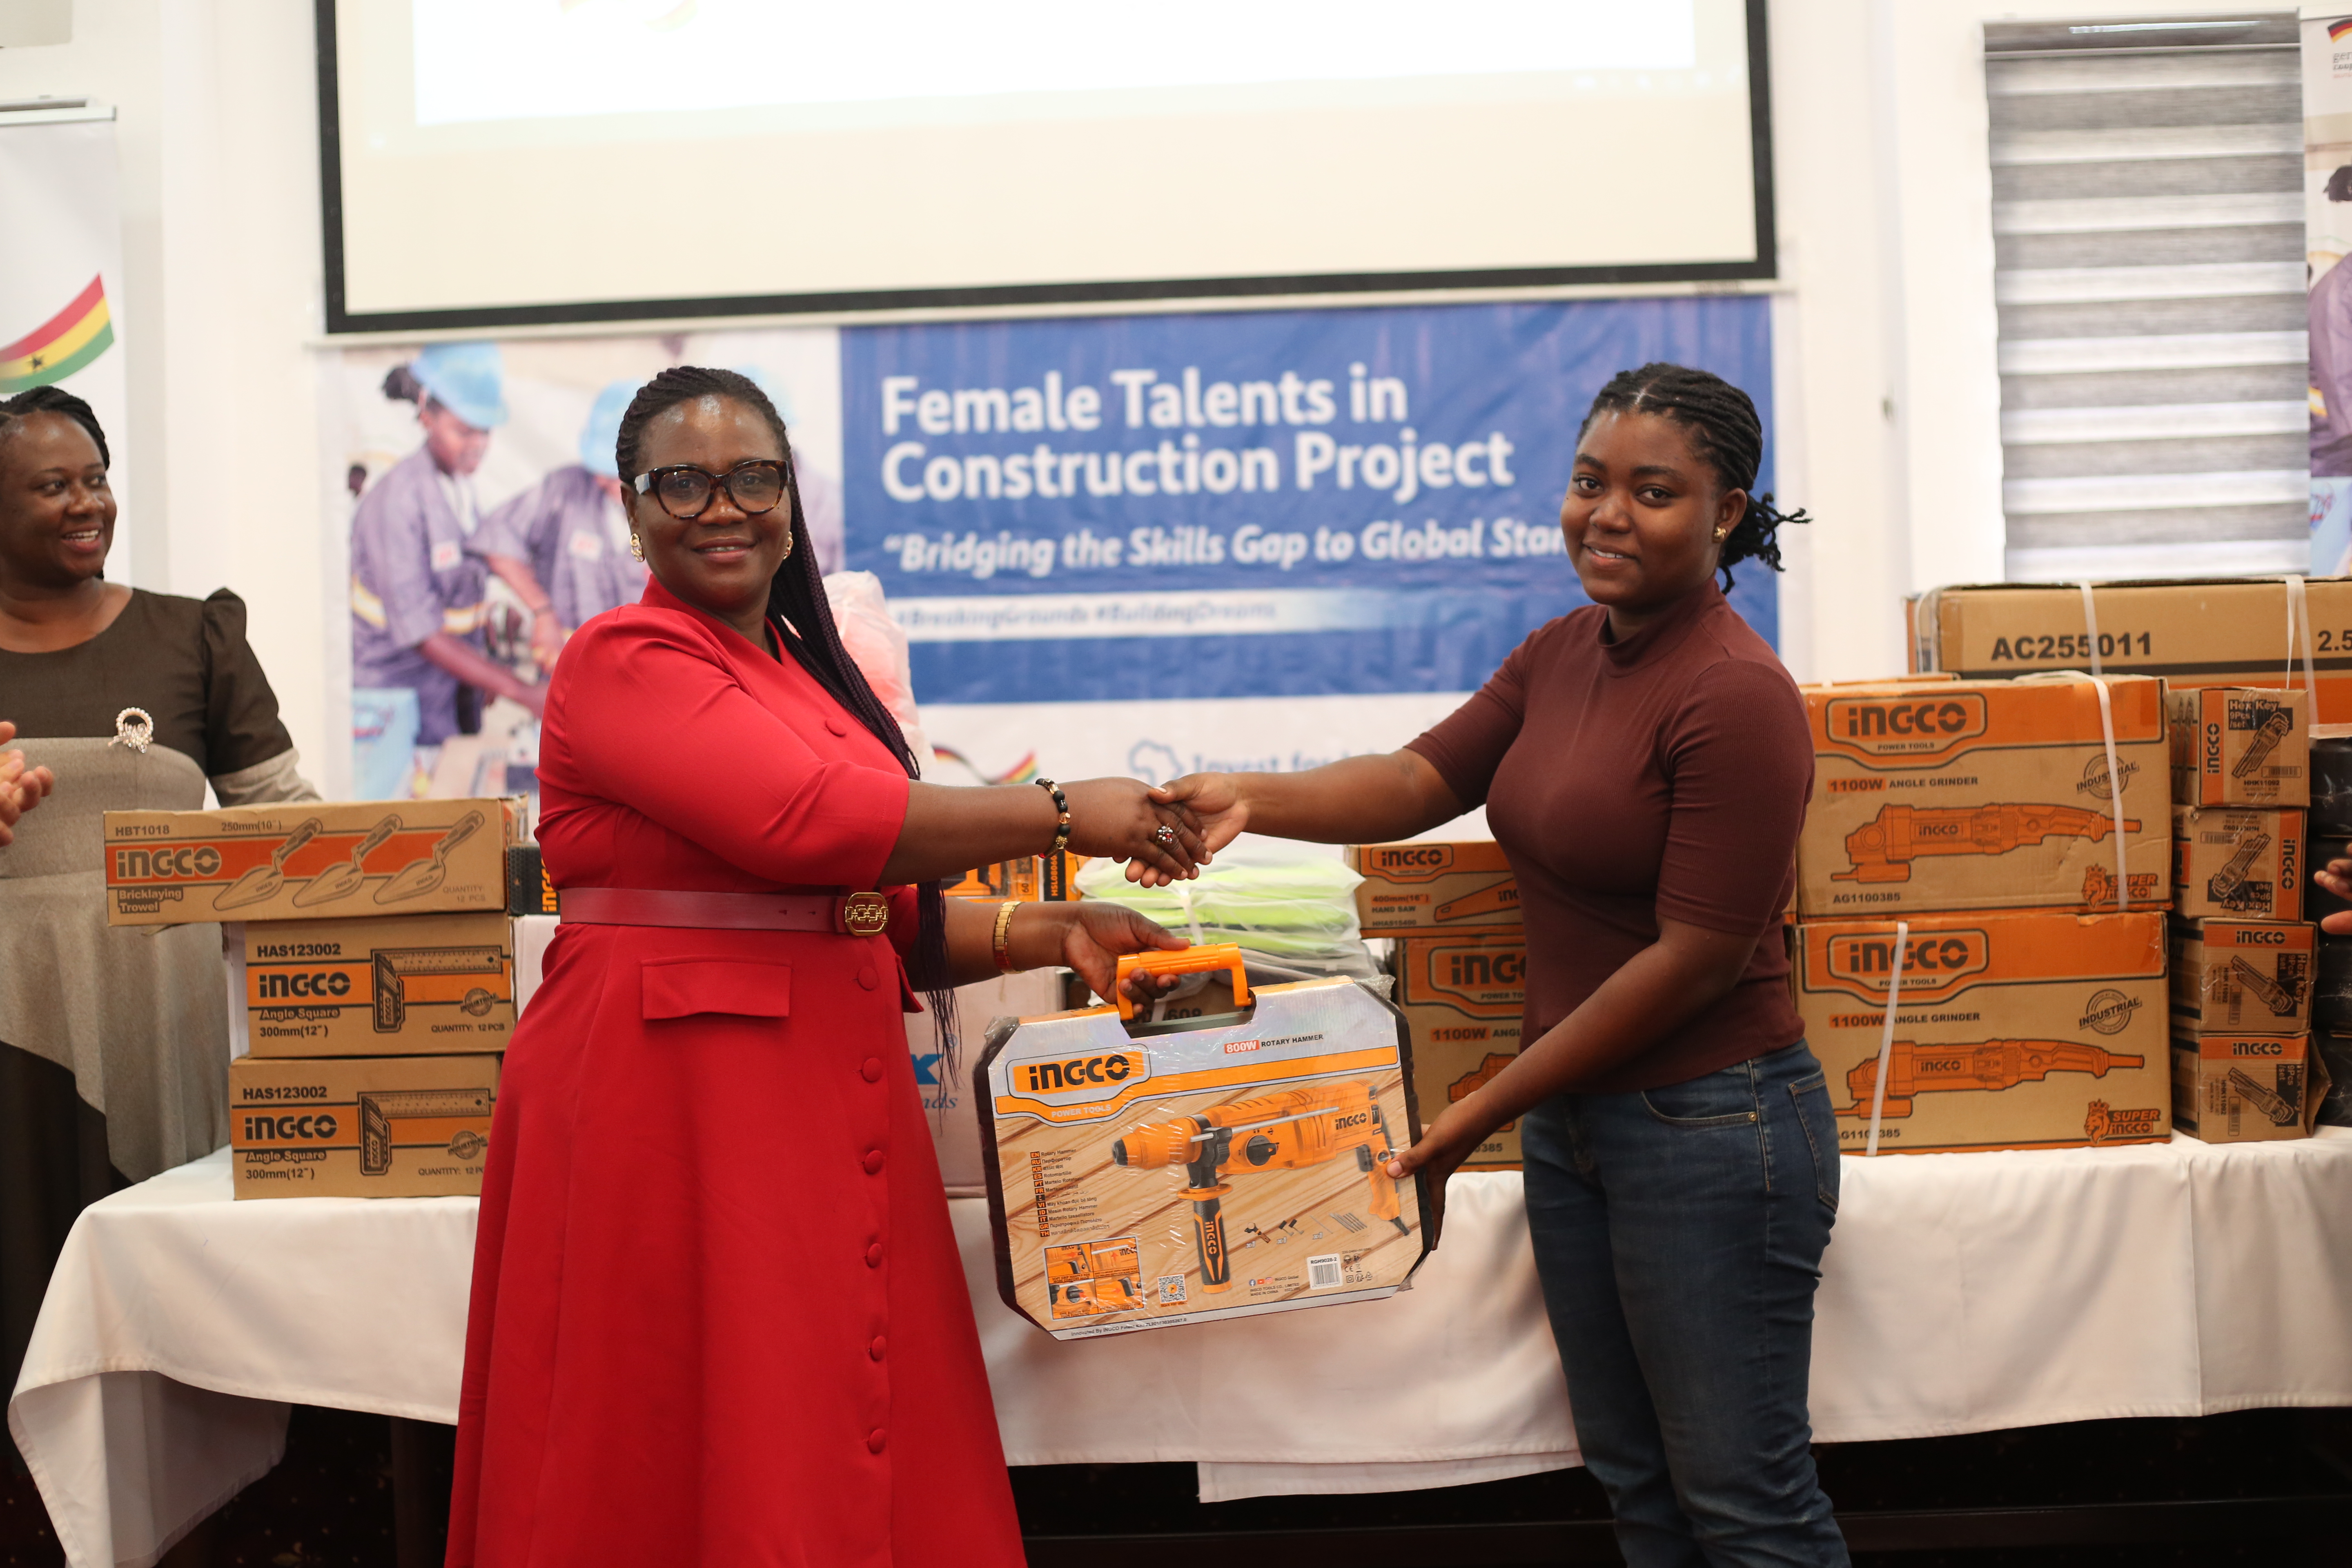 Female Talents in Construction